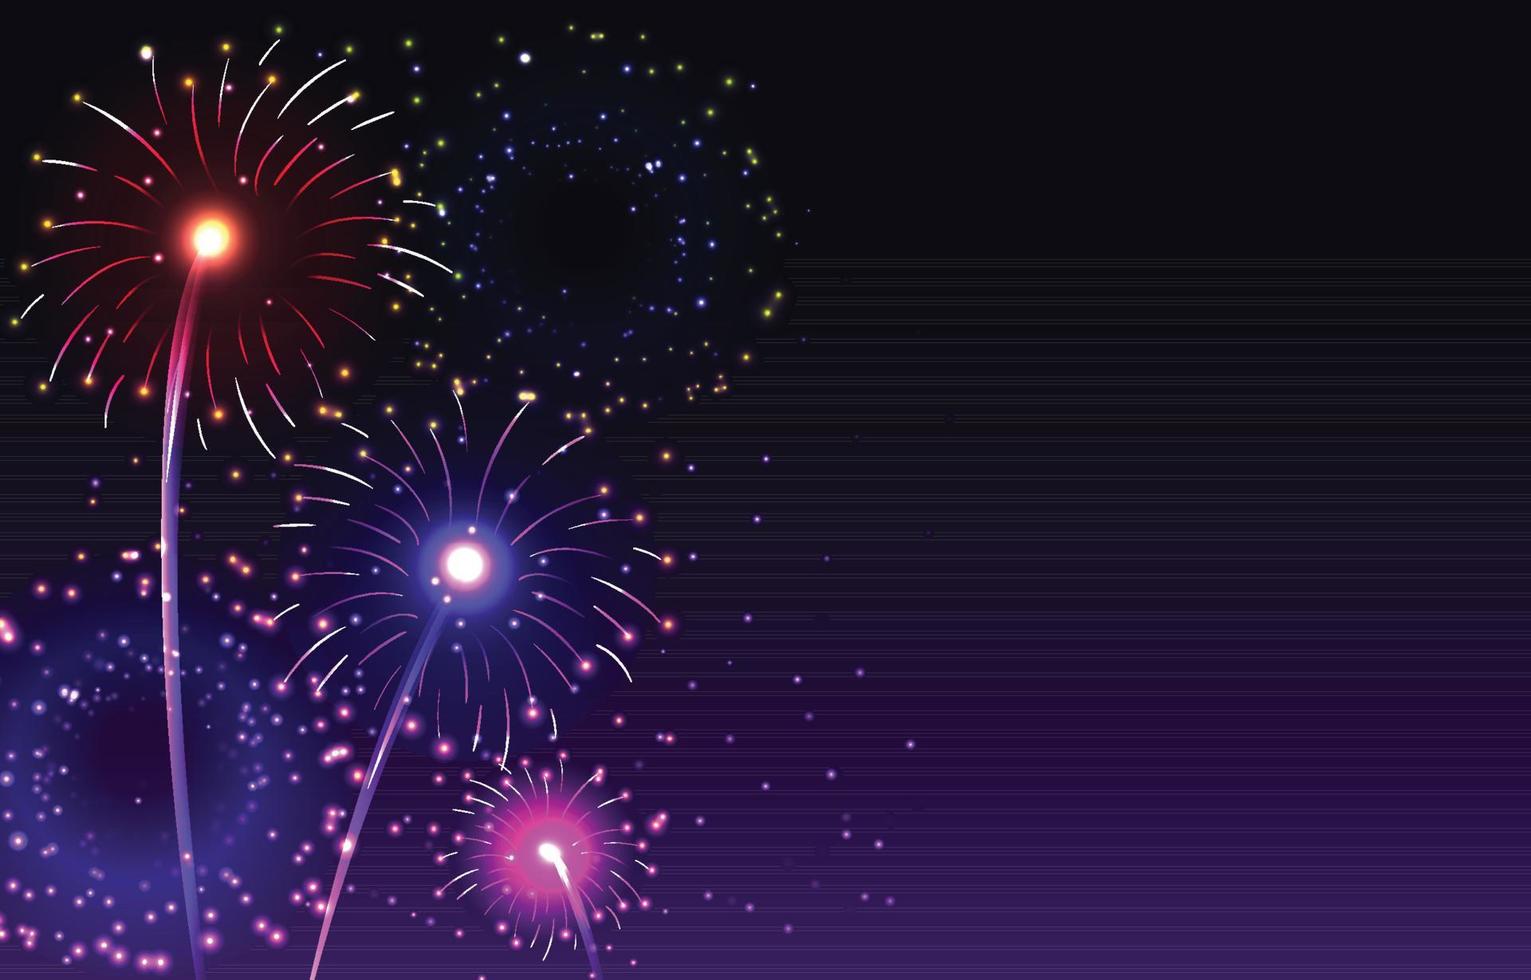 Fireworks on Night Background vector